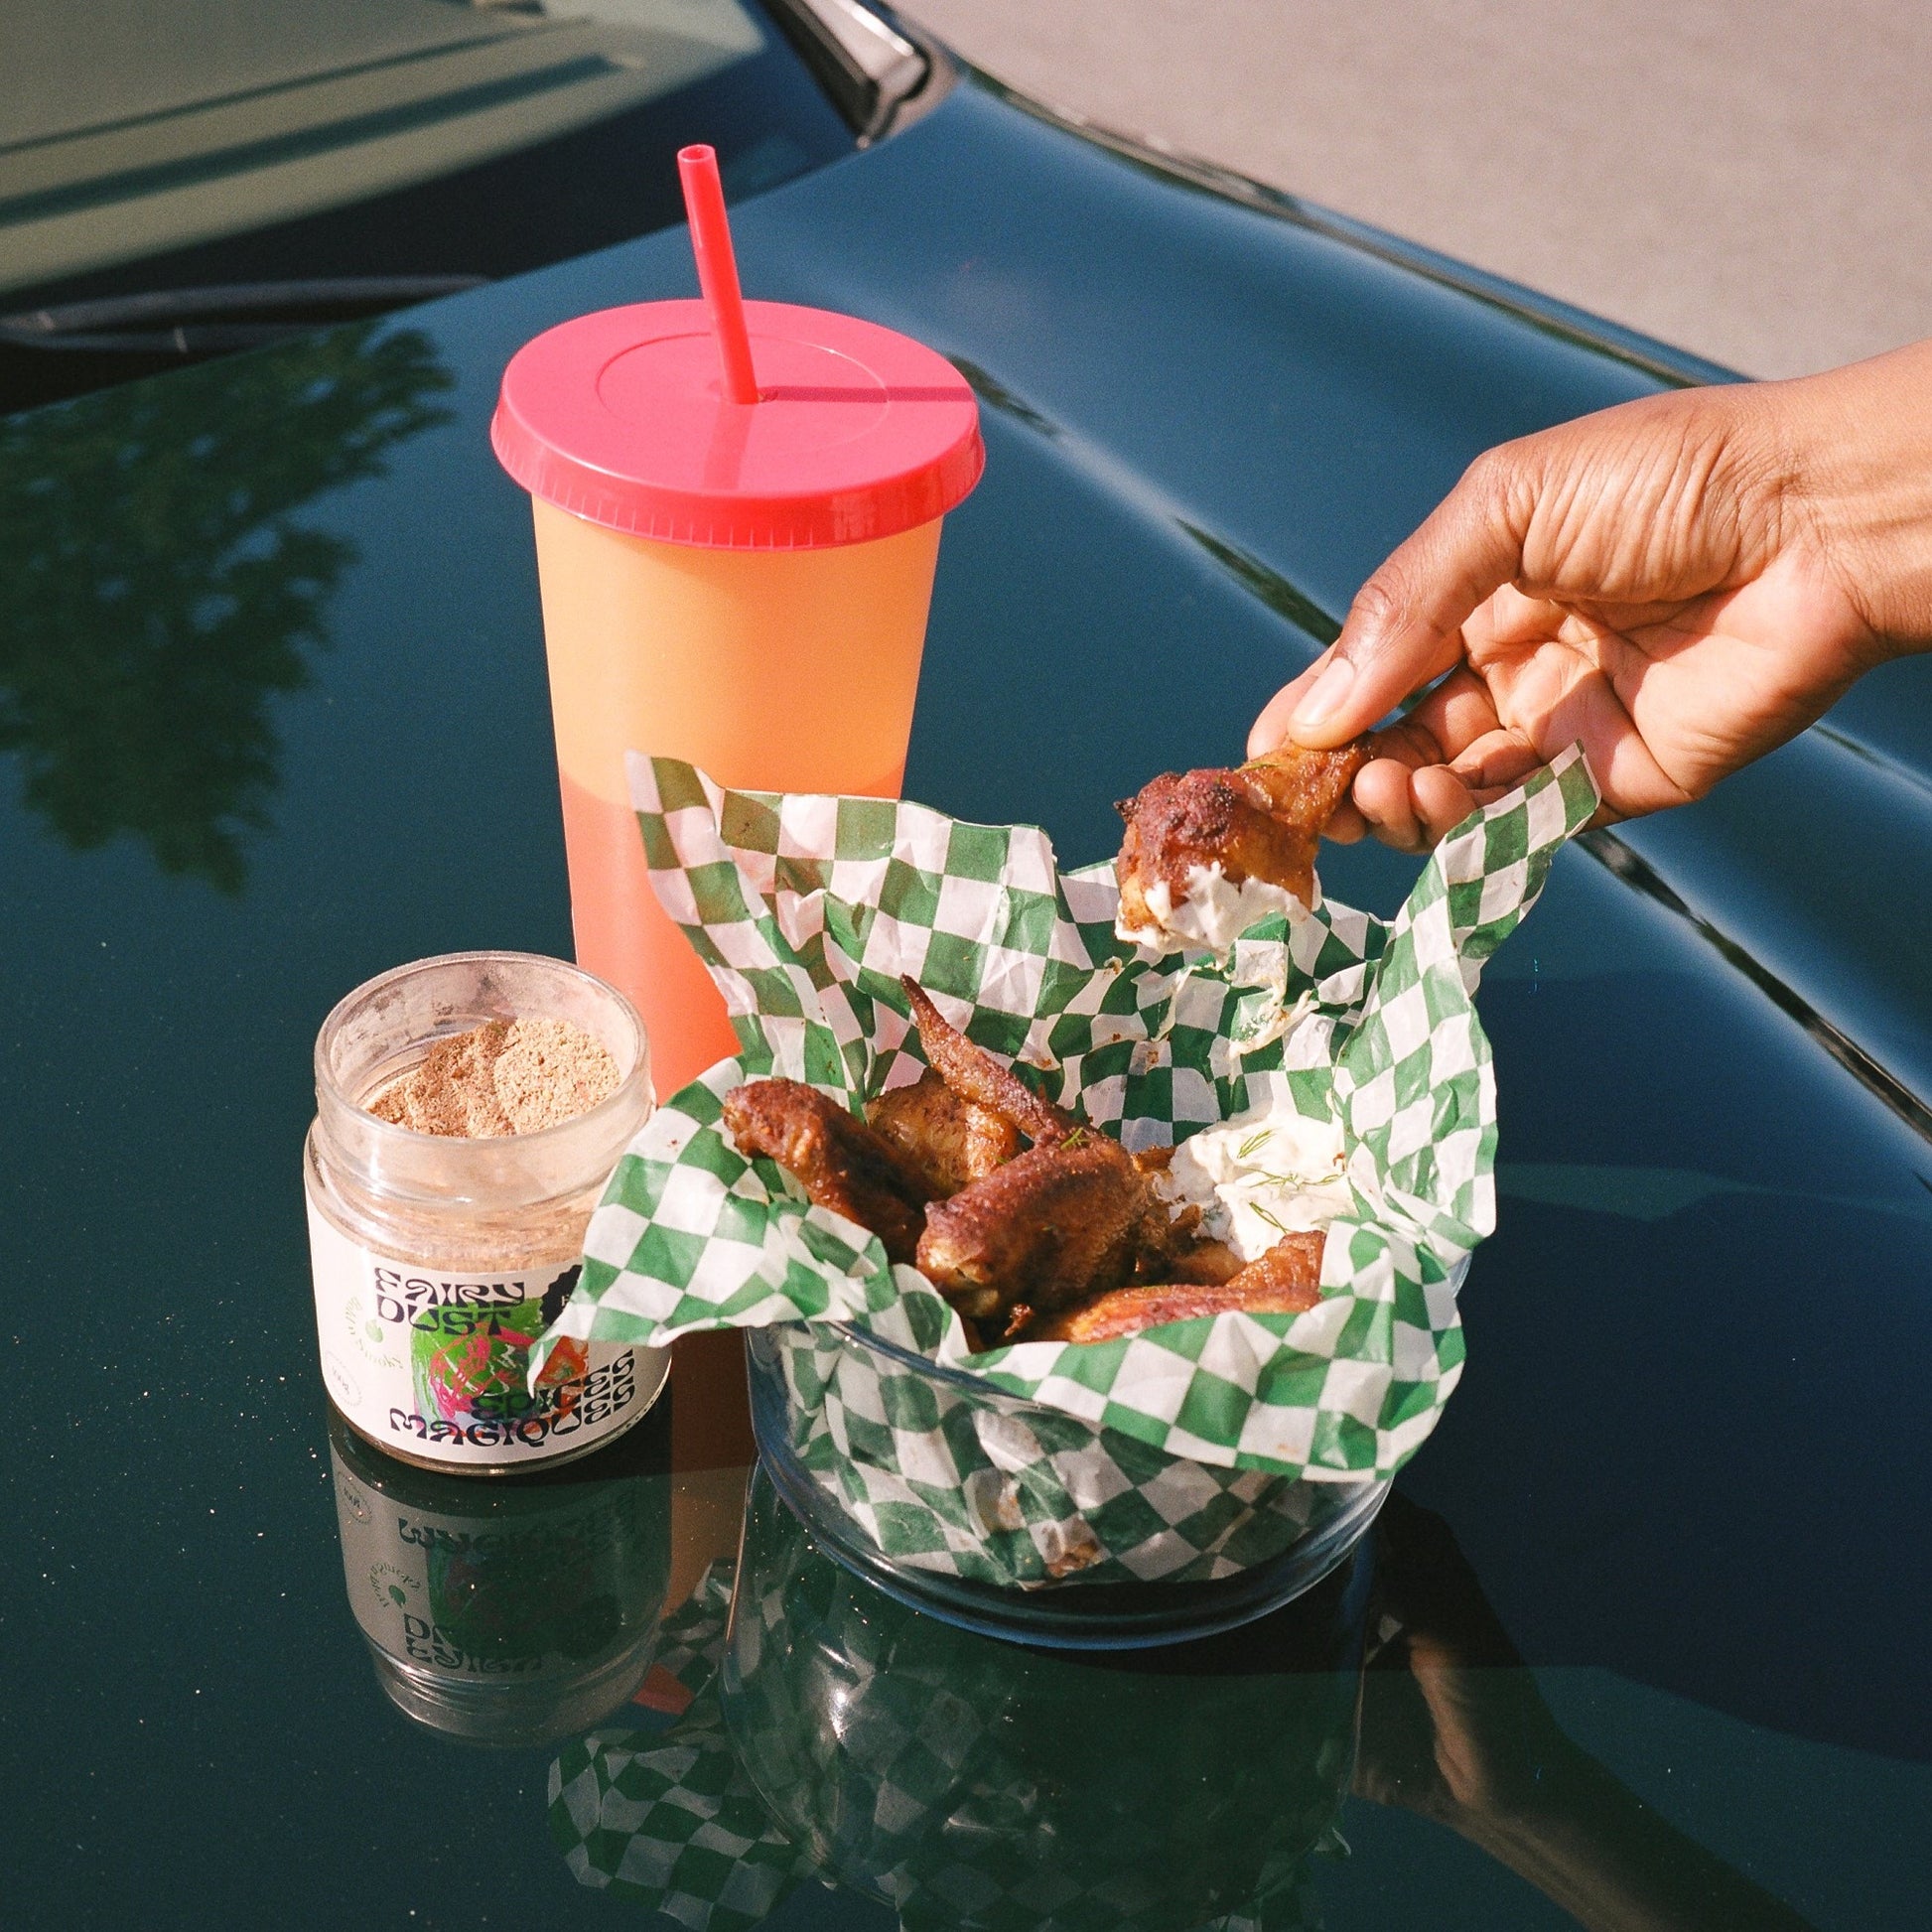 Hand grabbing for BBQ chicken wings made with ranch dip  next to on open jar of Bold n Smoky Fairy Dust spice blend and a drink on the hood of a car in summer